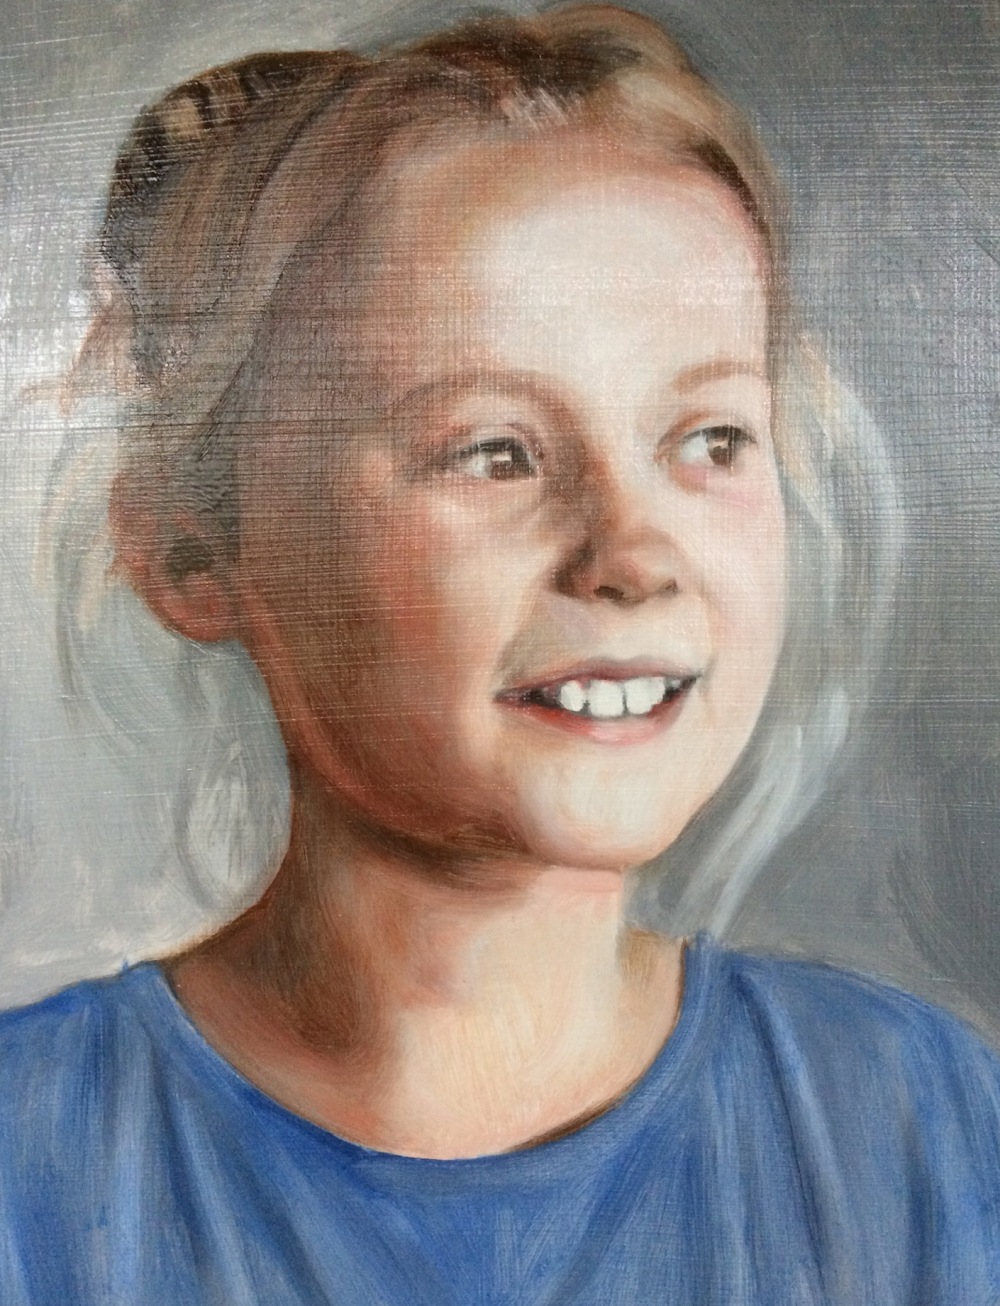 First glaze over a grisaille underpainting, oil on board by portrait painter and artist Matt Harvey